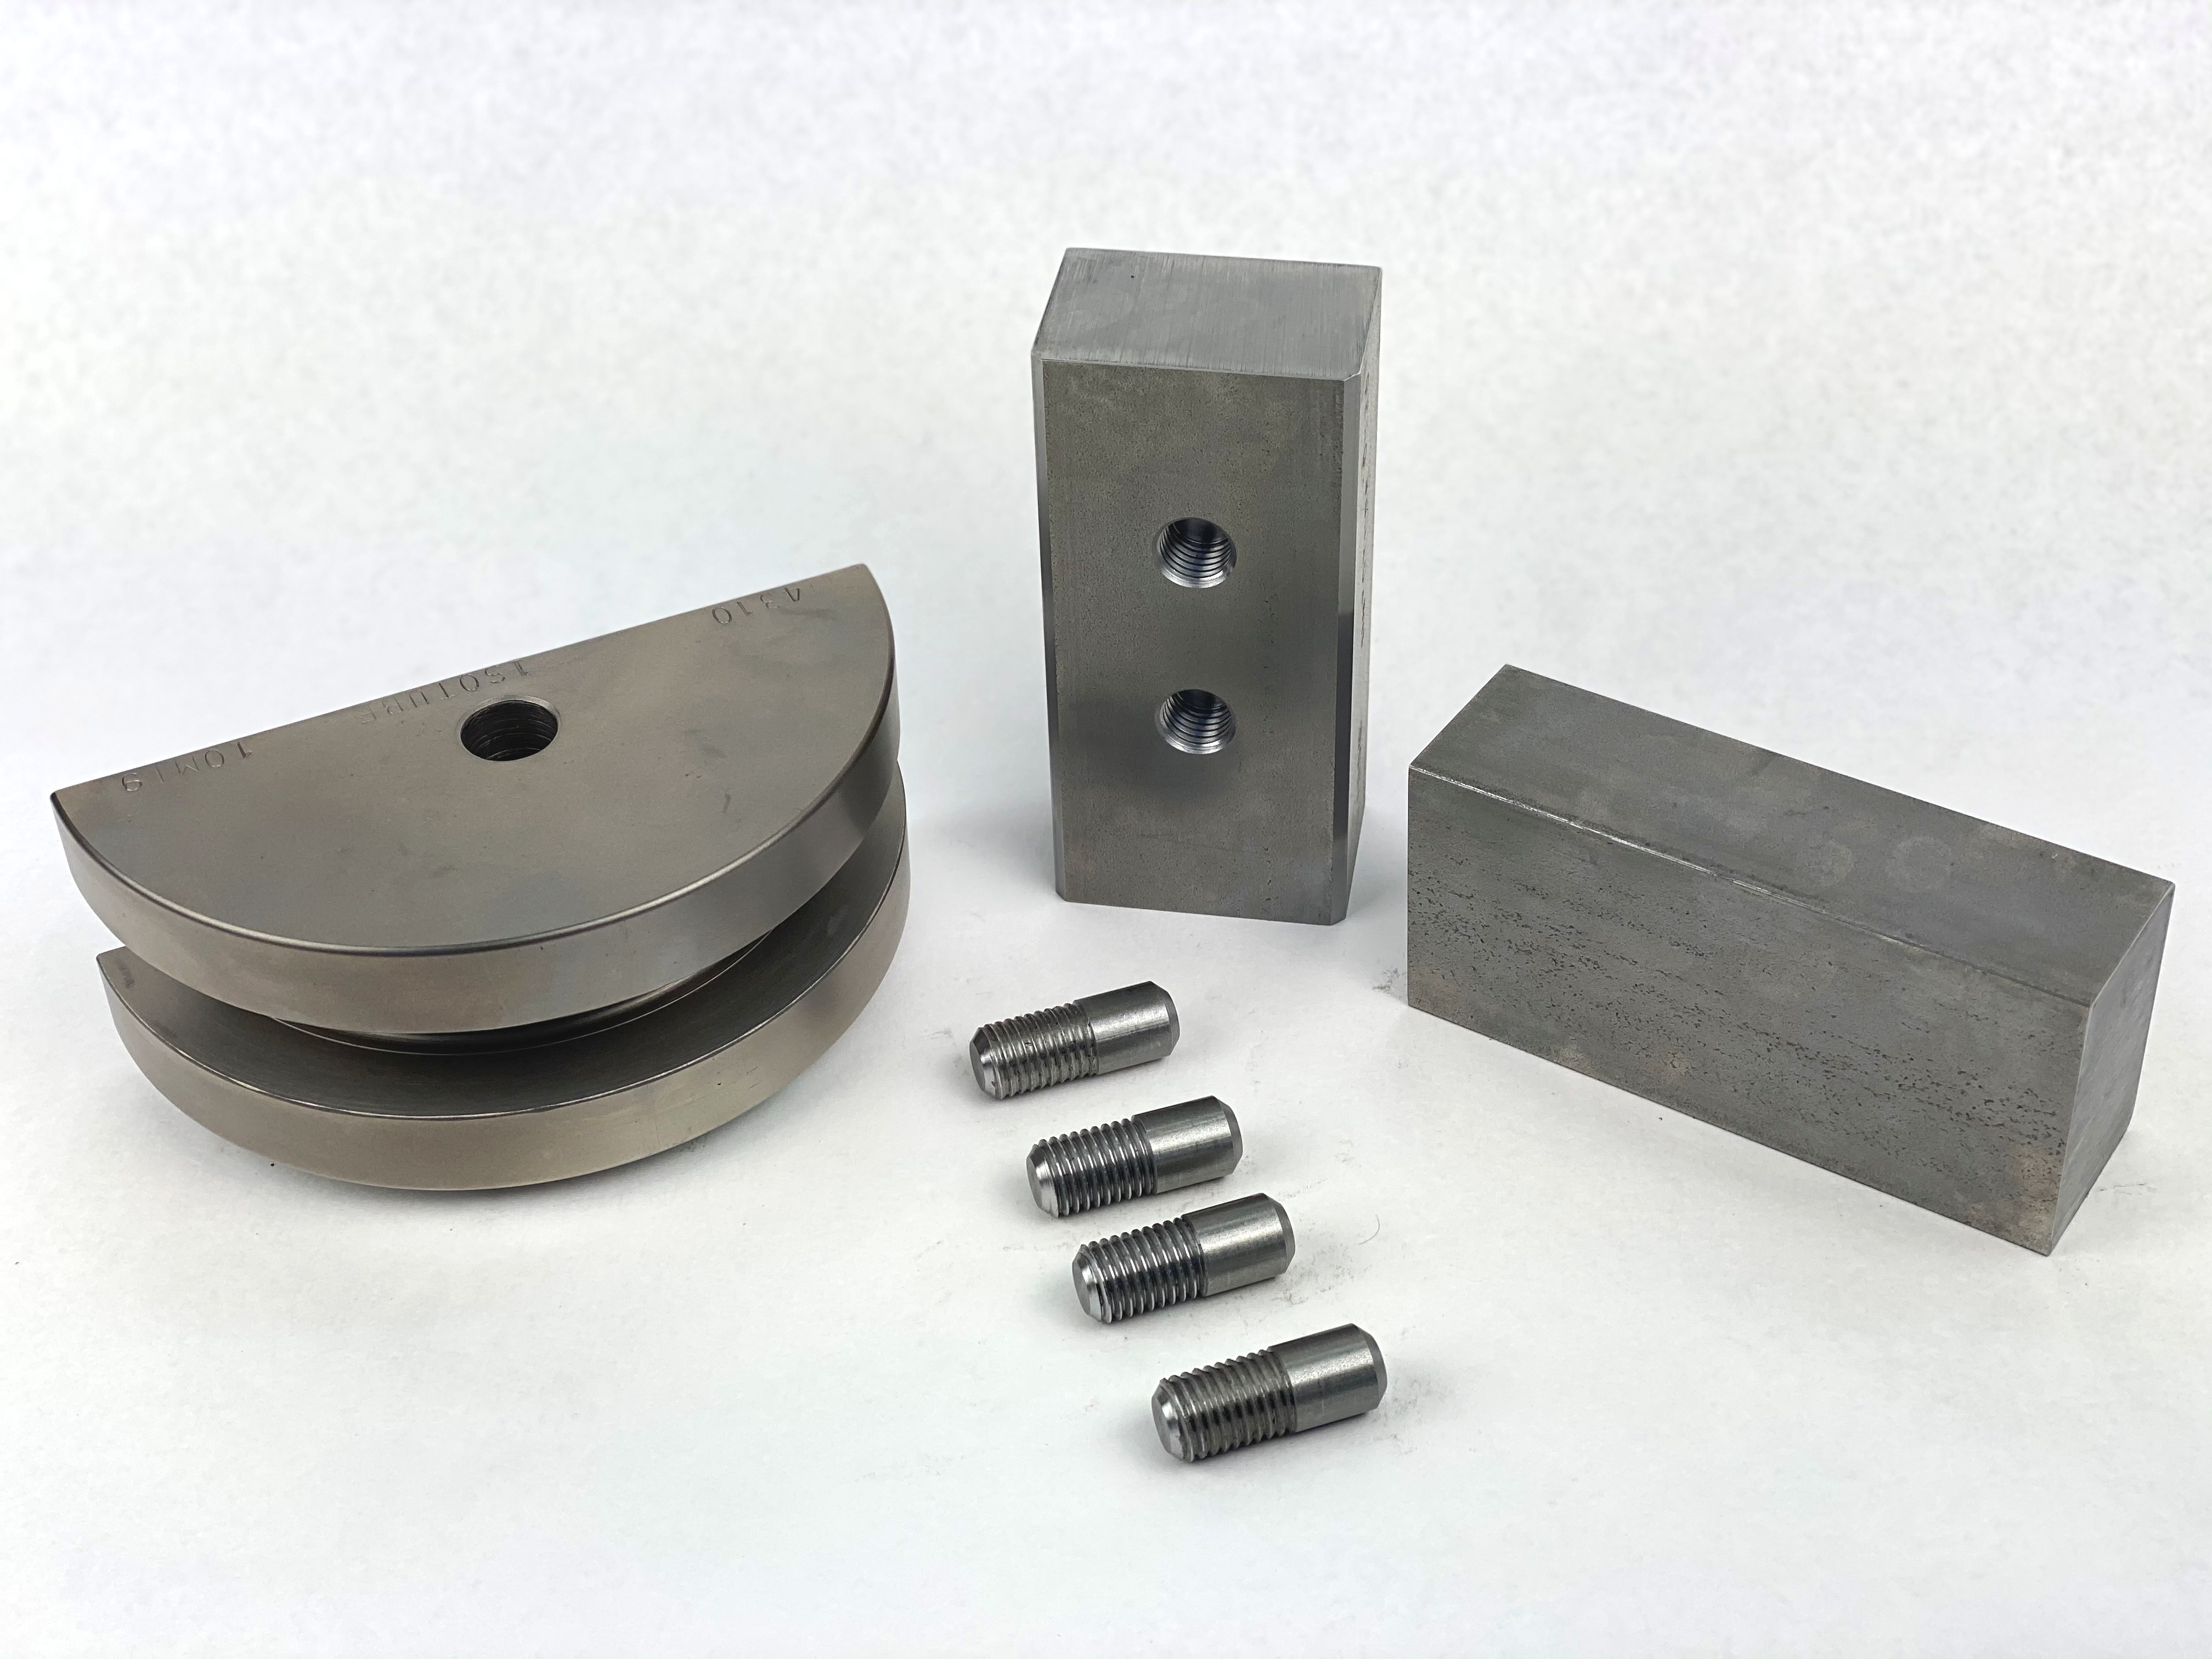 A set of square tooling by Huth-Ben Pearson for BendPak®️ machines. The tooling is grey steel and consists of several rectangular back shoes and a half-round die made to fit square pipe and tubing.